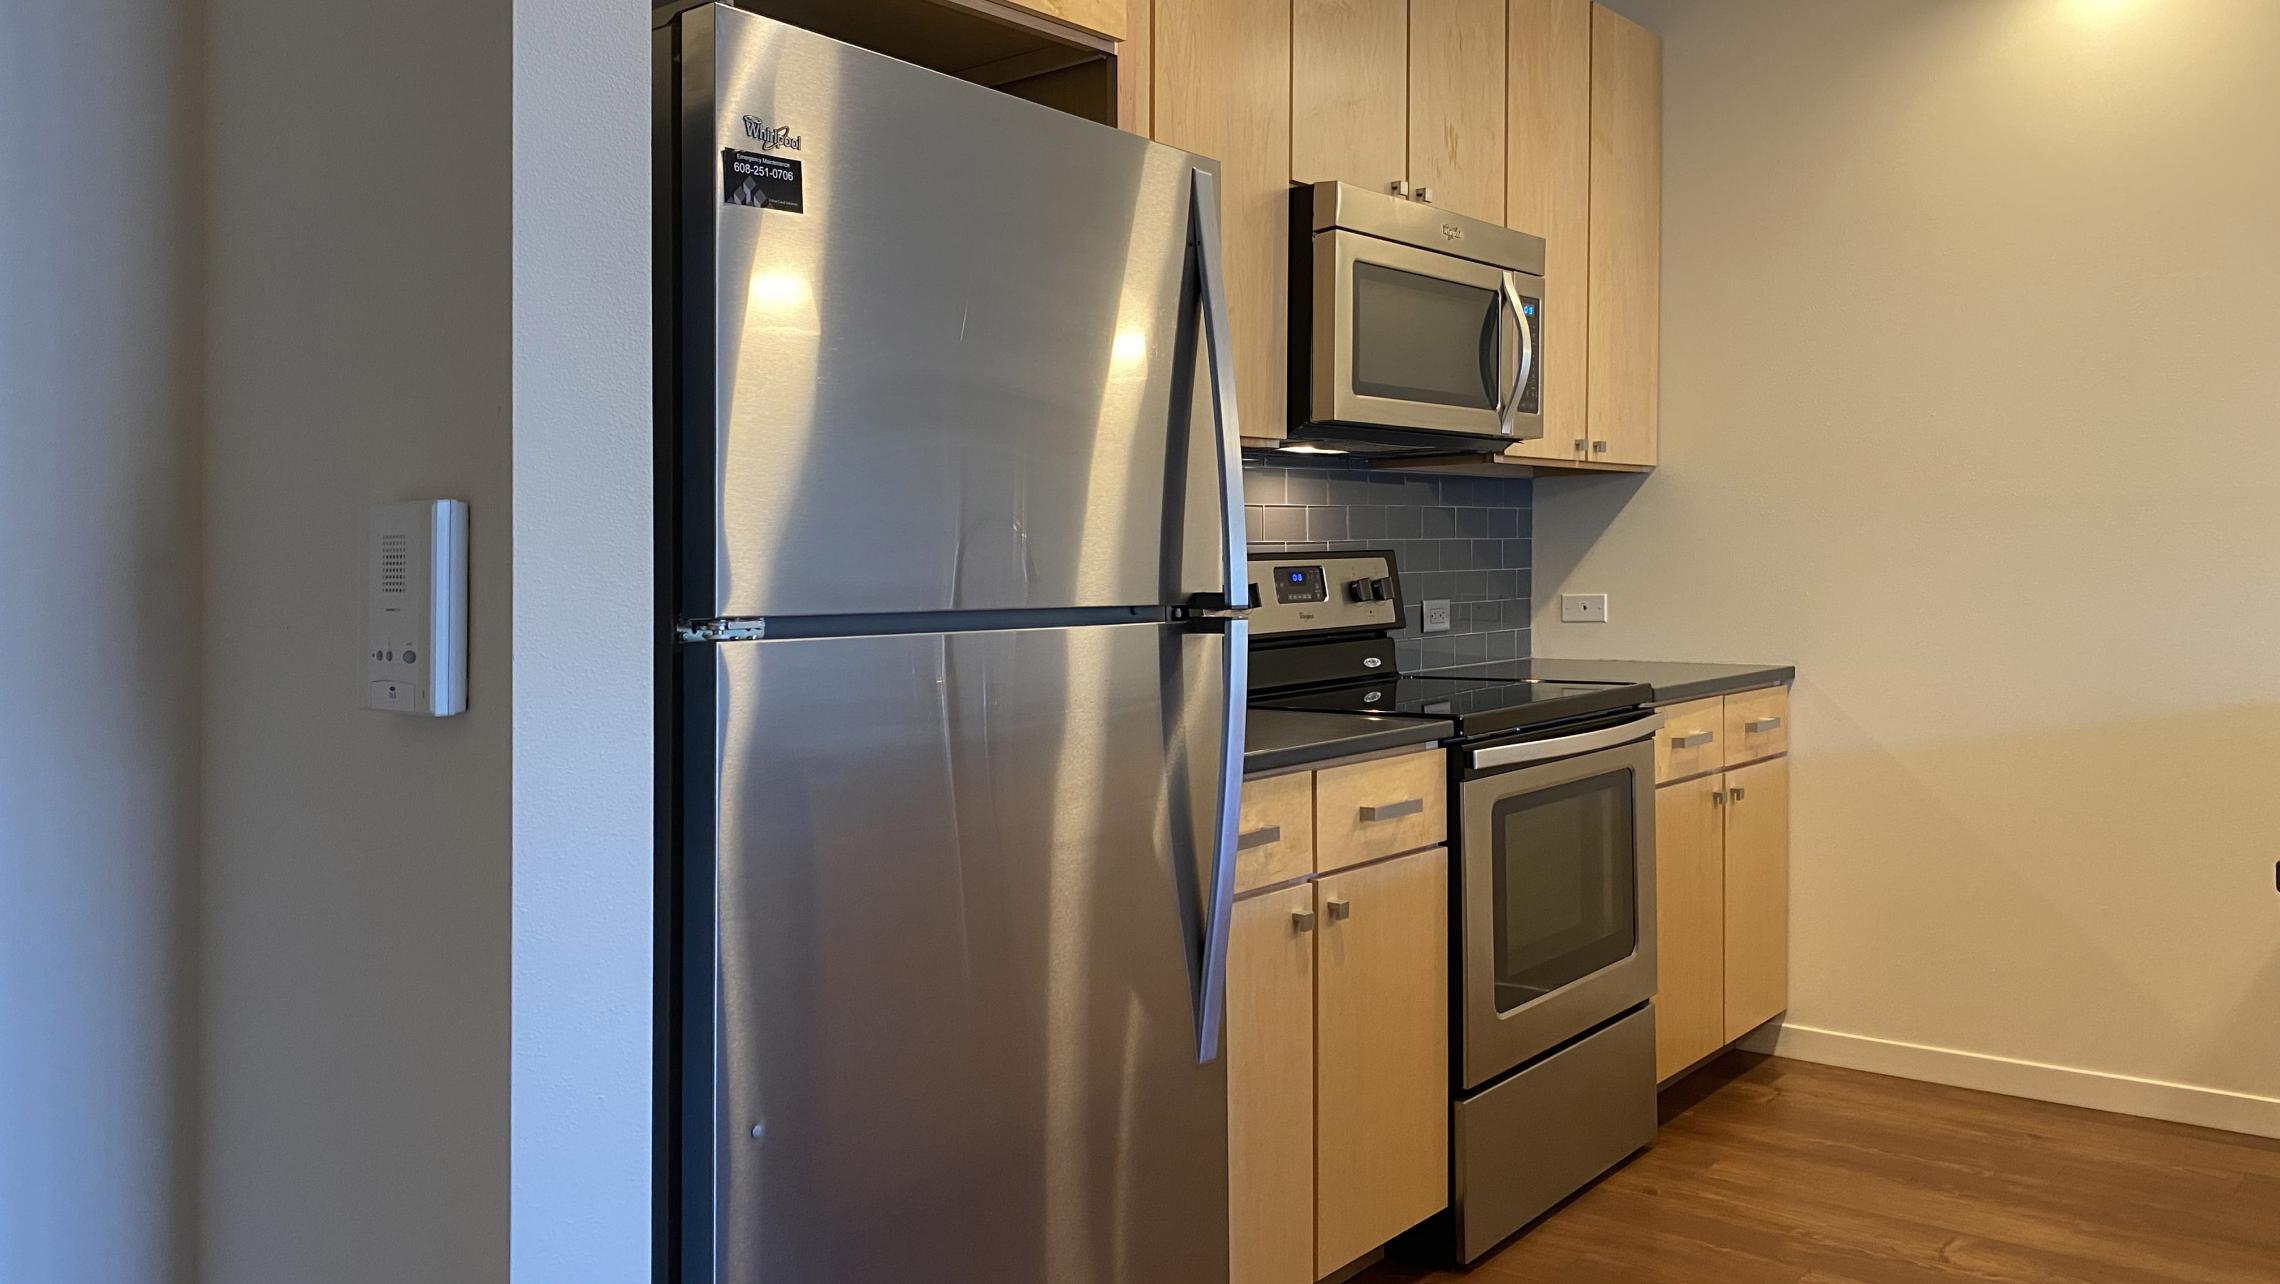 Nine-Line-at-The-Yards-Apartment-324-Two-Bedroom-Lake-View-Natural-Light-Sunny-Modern-Upscale-Designe-Luxury-Luxurious-Balcony-Views-Fitness-Lounge-Courtyard-Dogs-Cats-Bike-Trail-Downtown-Capitol